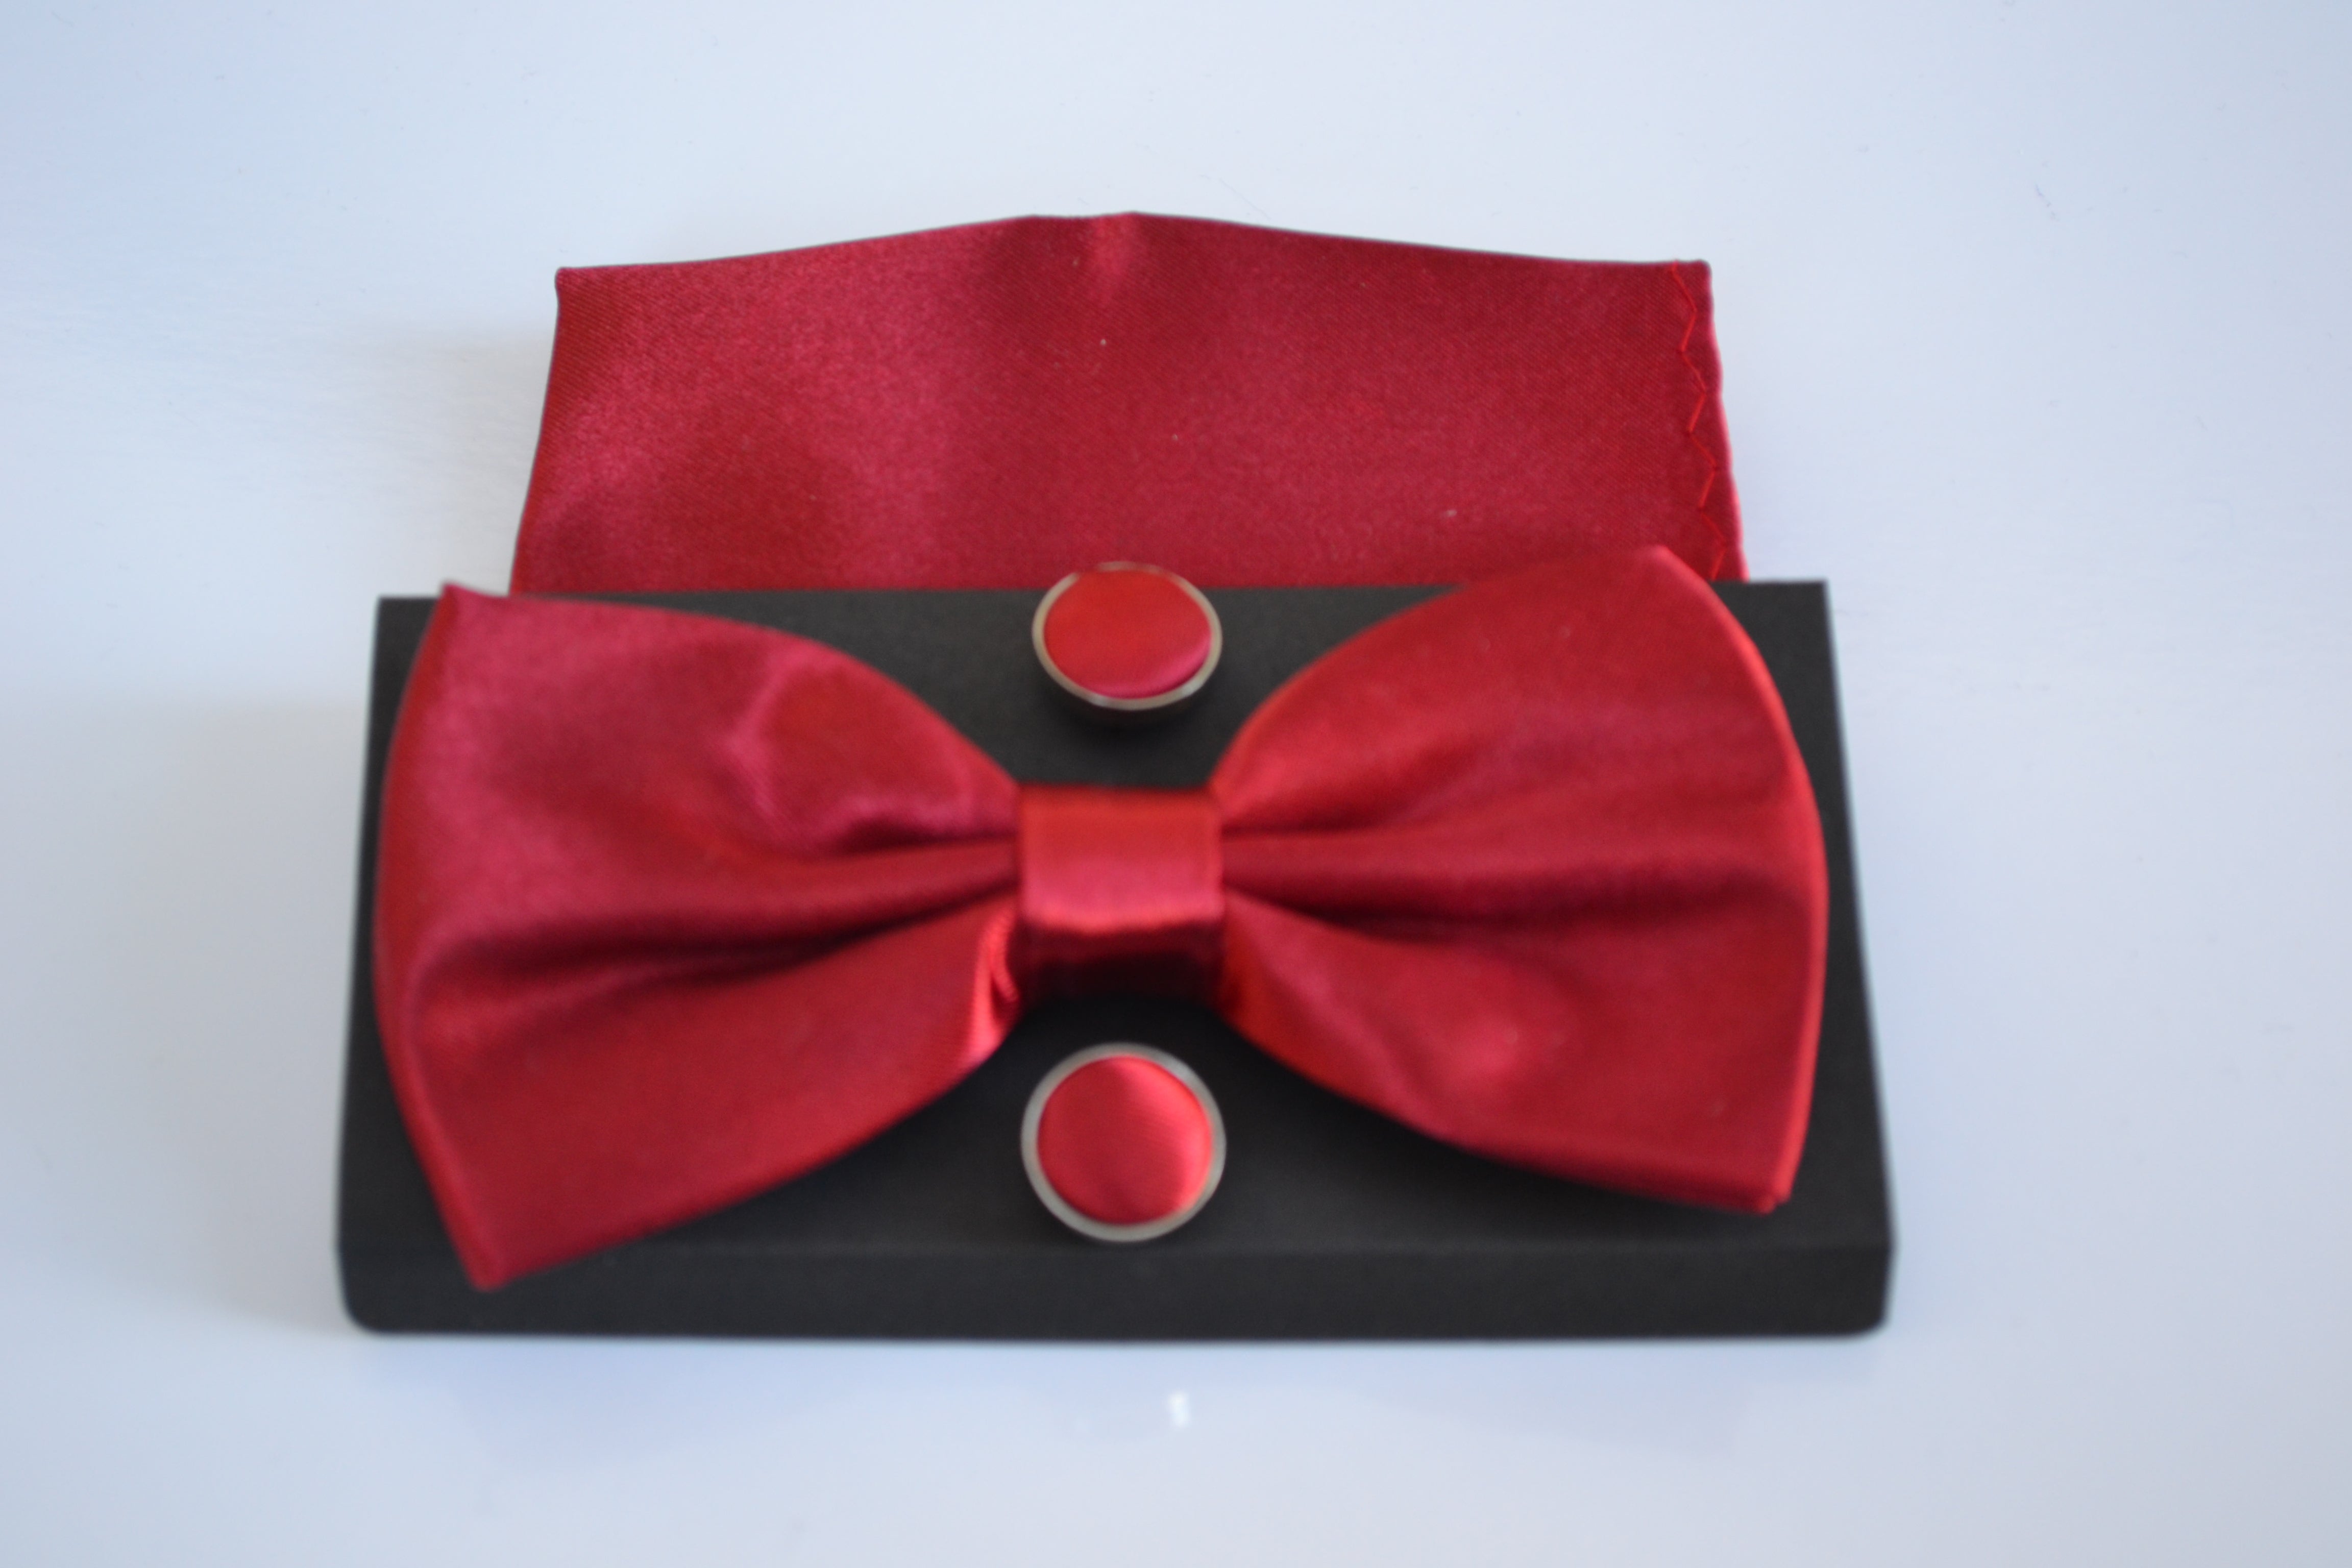 Red Bow Tie Set – RUSH ST FOR MEN